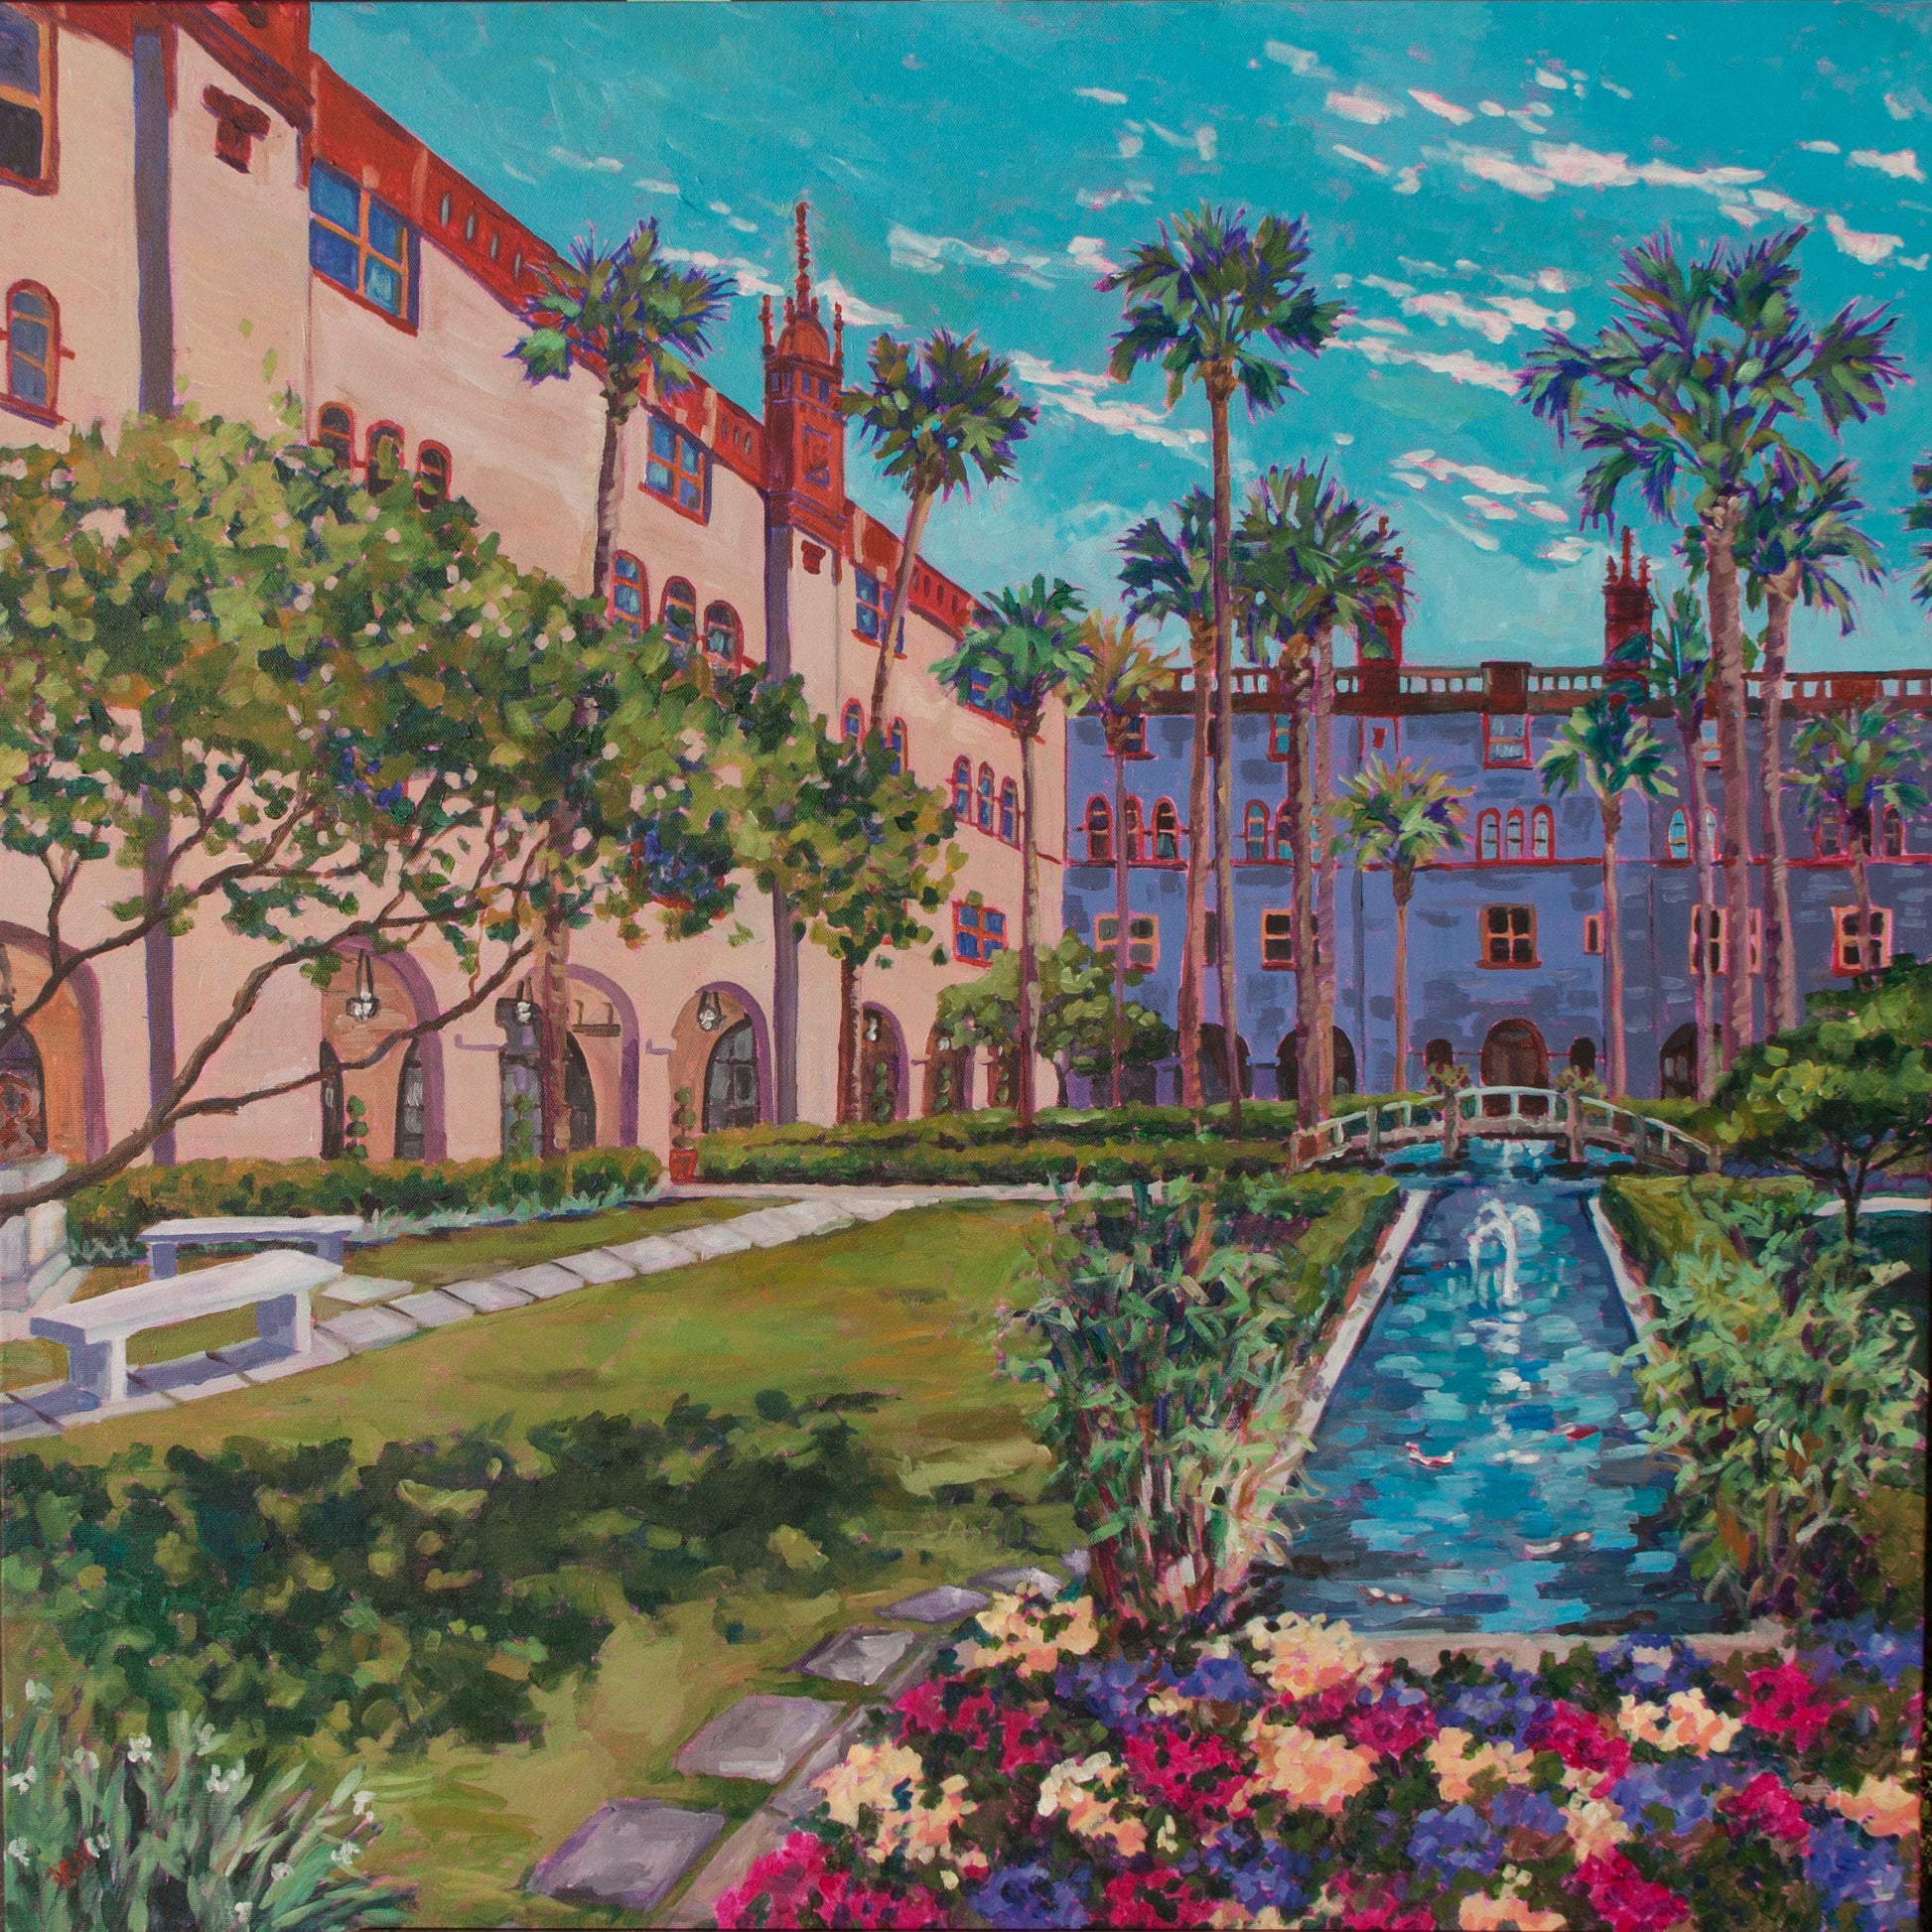 Courtyard with koi pond at the Lightner Museum in historic st augustine florida